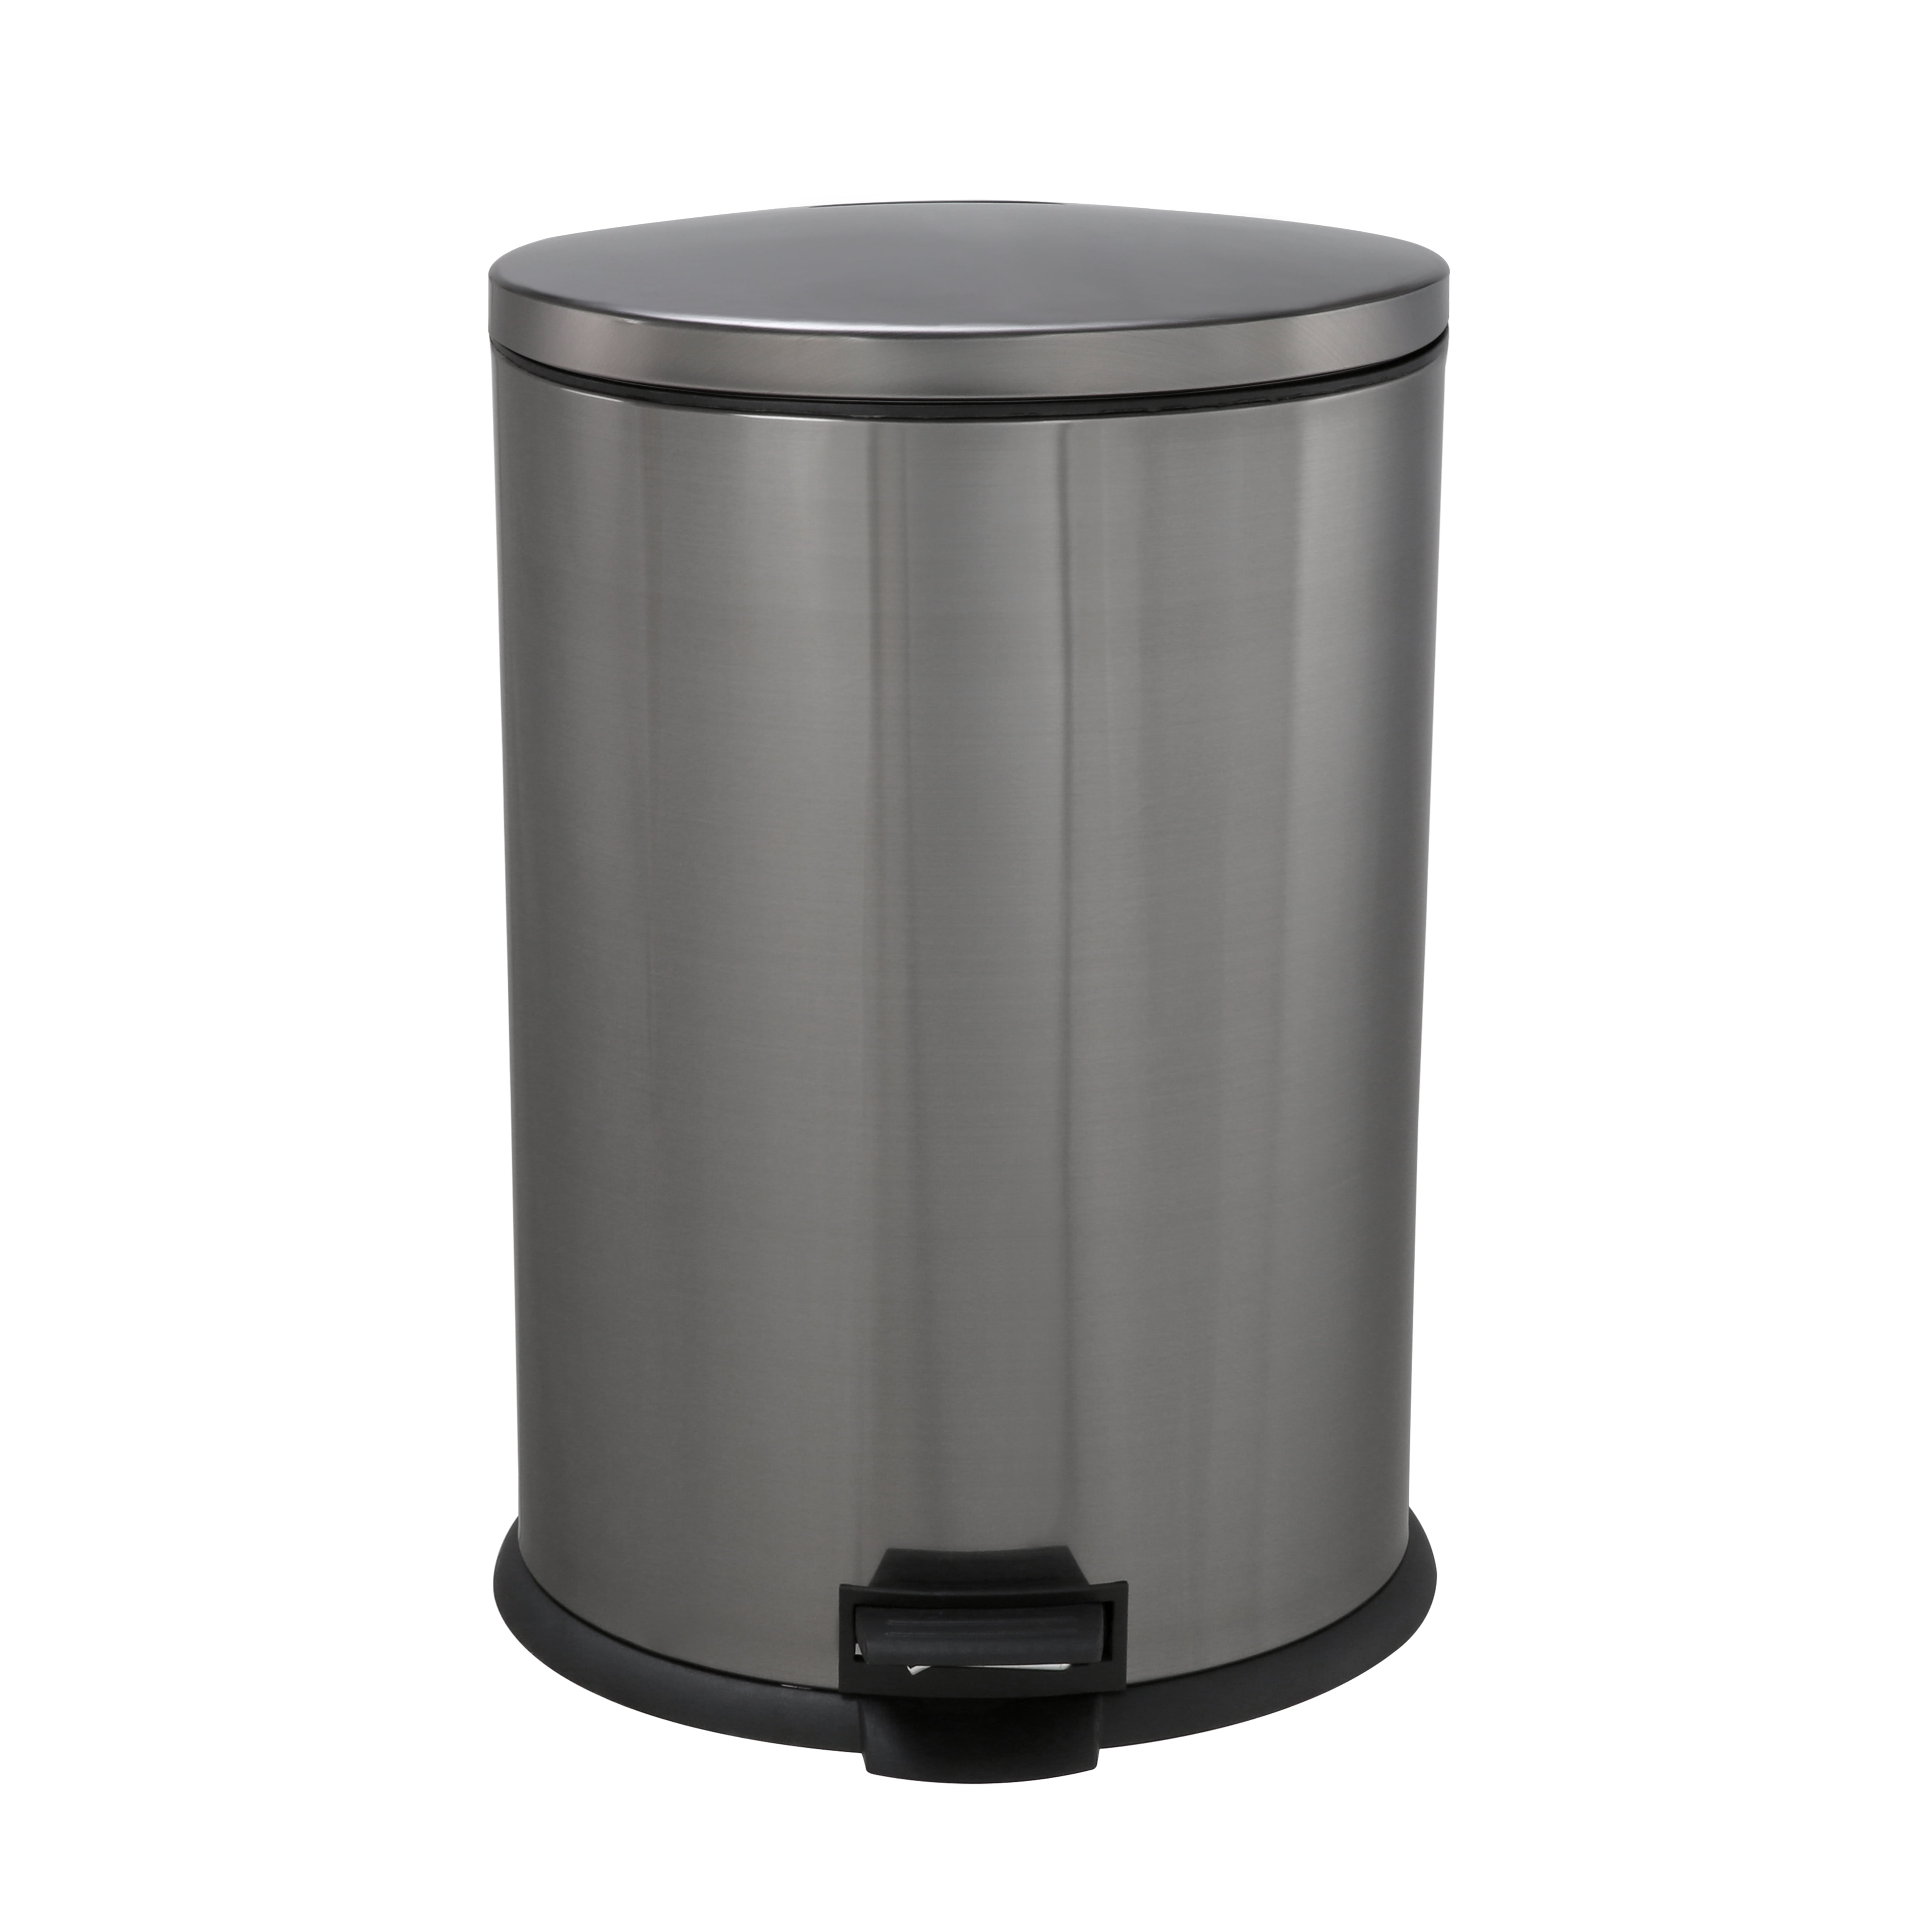 Better Homes & Gardens 1.3 Gallon Trash Can, Oval Bathroom Trash Can,  Stainless Steel 